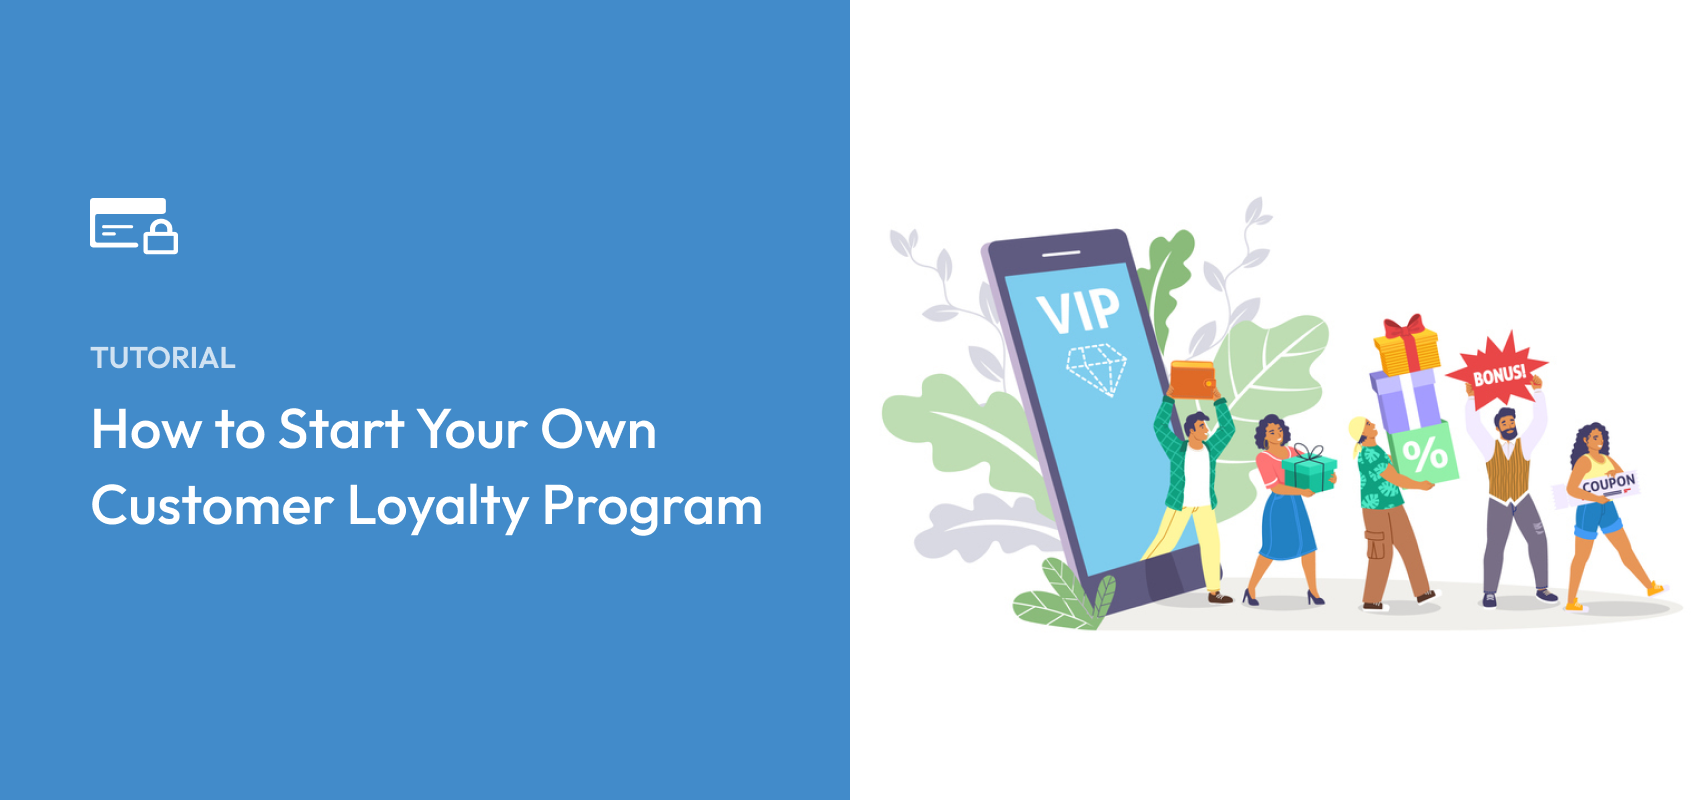 How to Start Your Own Customer Loyalty Program